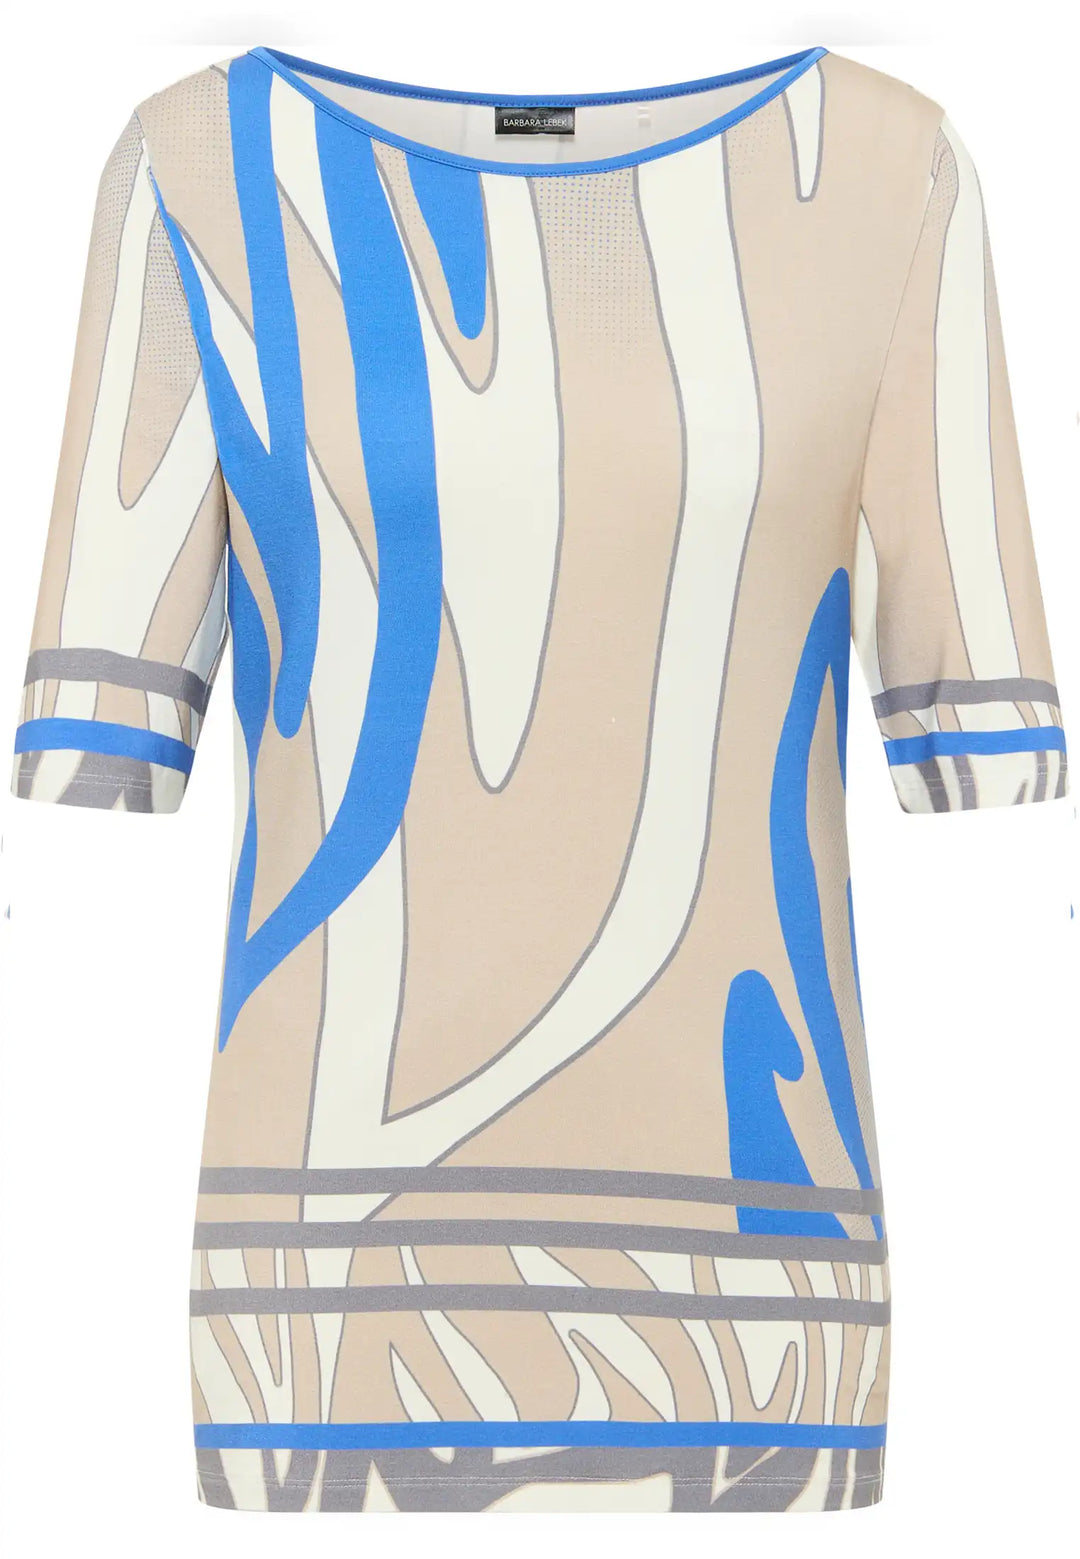 Short-sleeved top with sky blue and beige abstract pattern and boat neckline, style 60040042-120 